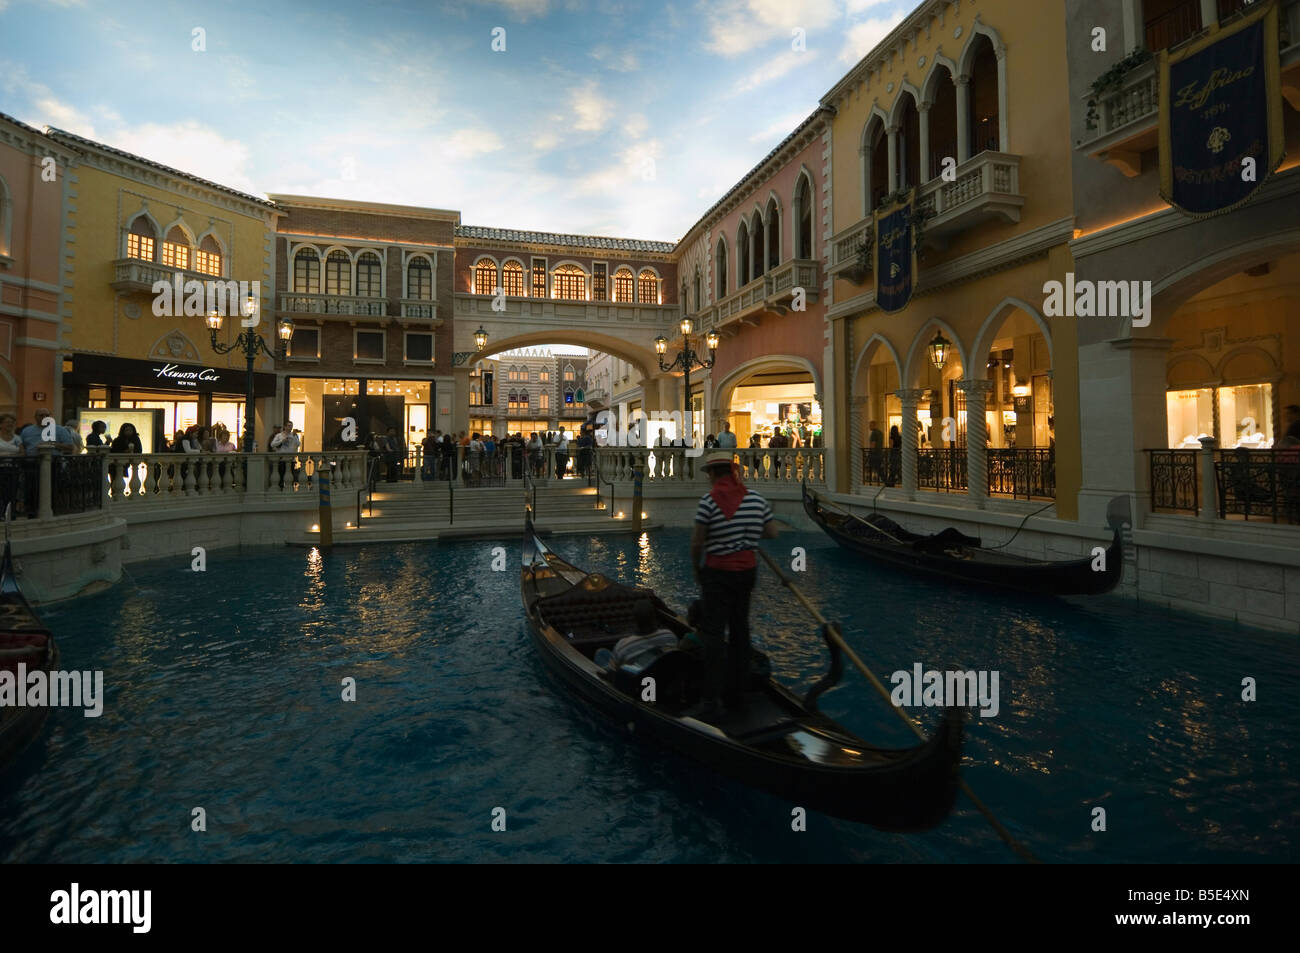 Inside the Venetian Hotel complete with gondoliers and a recreated Venice, Las Vegas, Nevada Stock Photo